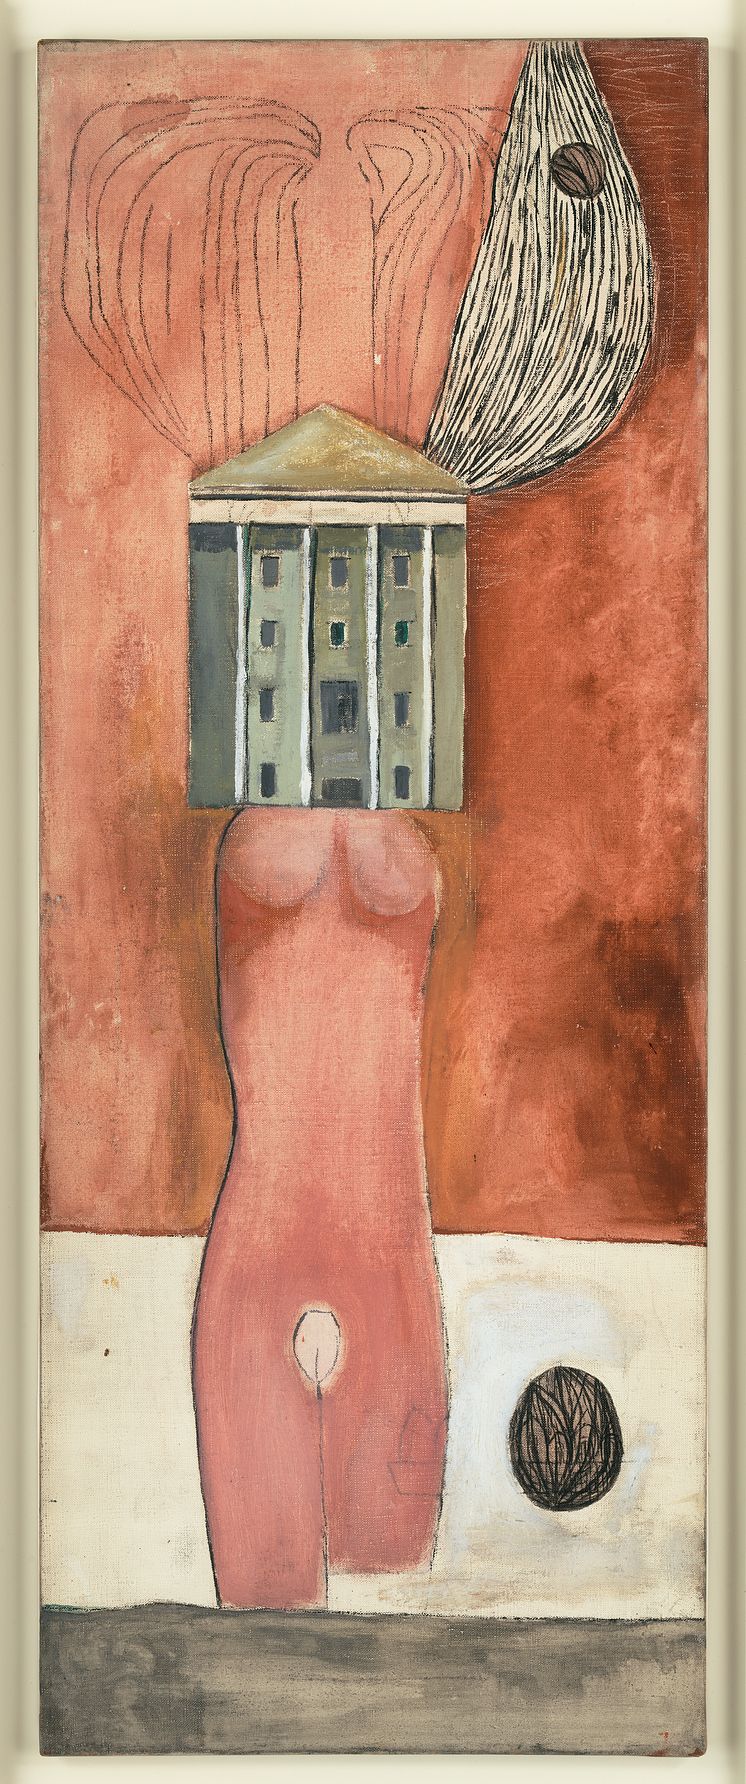 Louise Bourgeois, Femme Maison, 1946-1947. Copyright The Easton Foundation Licensed by BONO, NO and VAGA at ARS, NY. Photo Christopher Burke